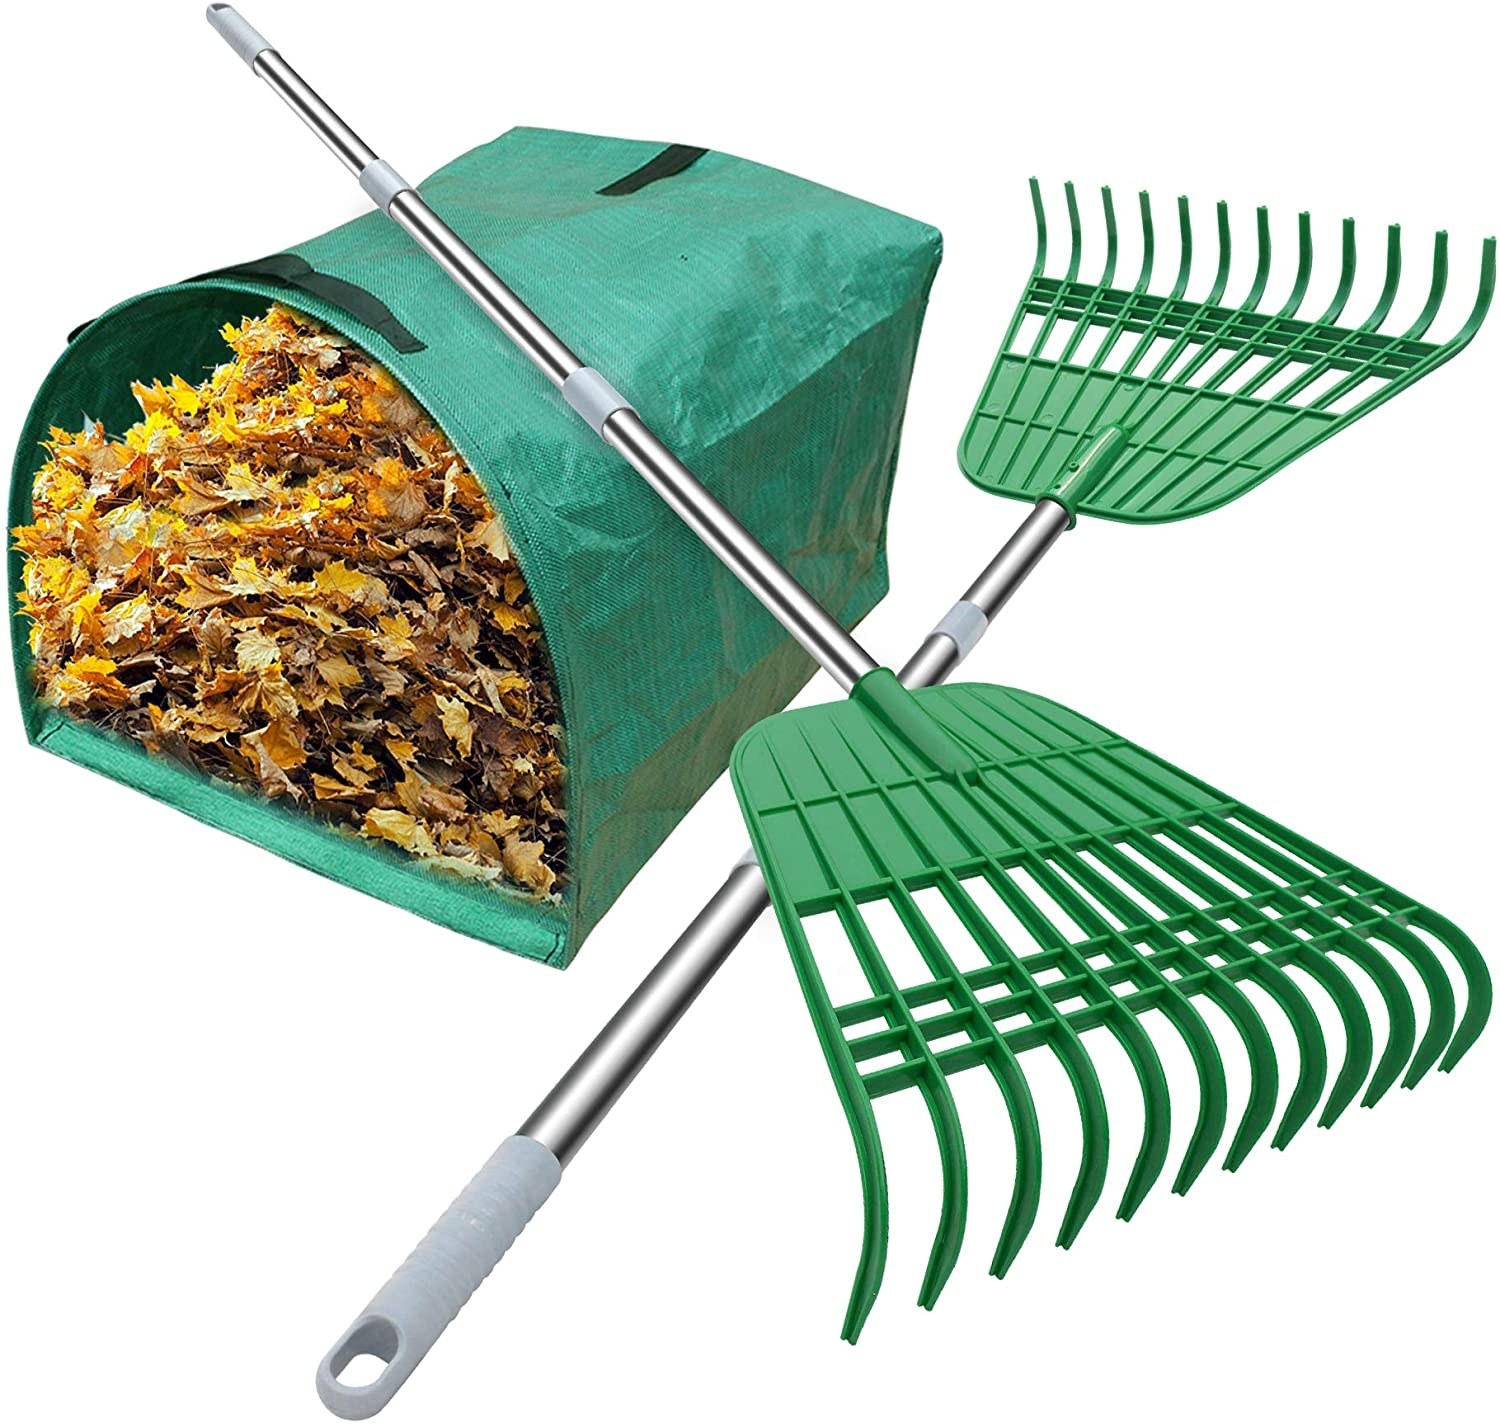 two green plastic rakes with a metal handle and dustpan leaf bag